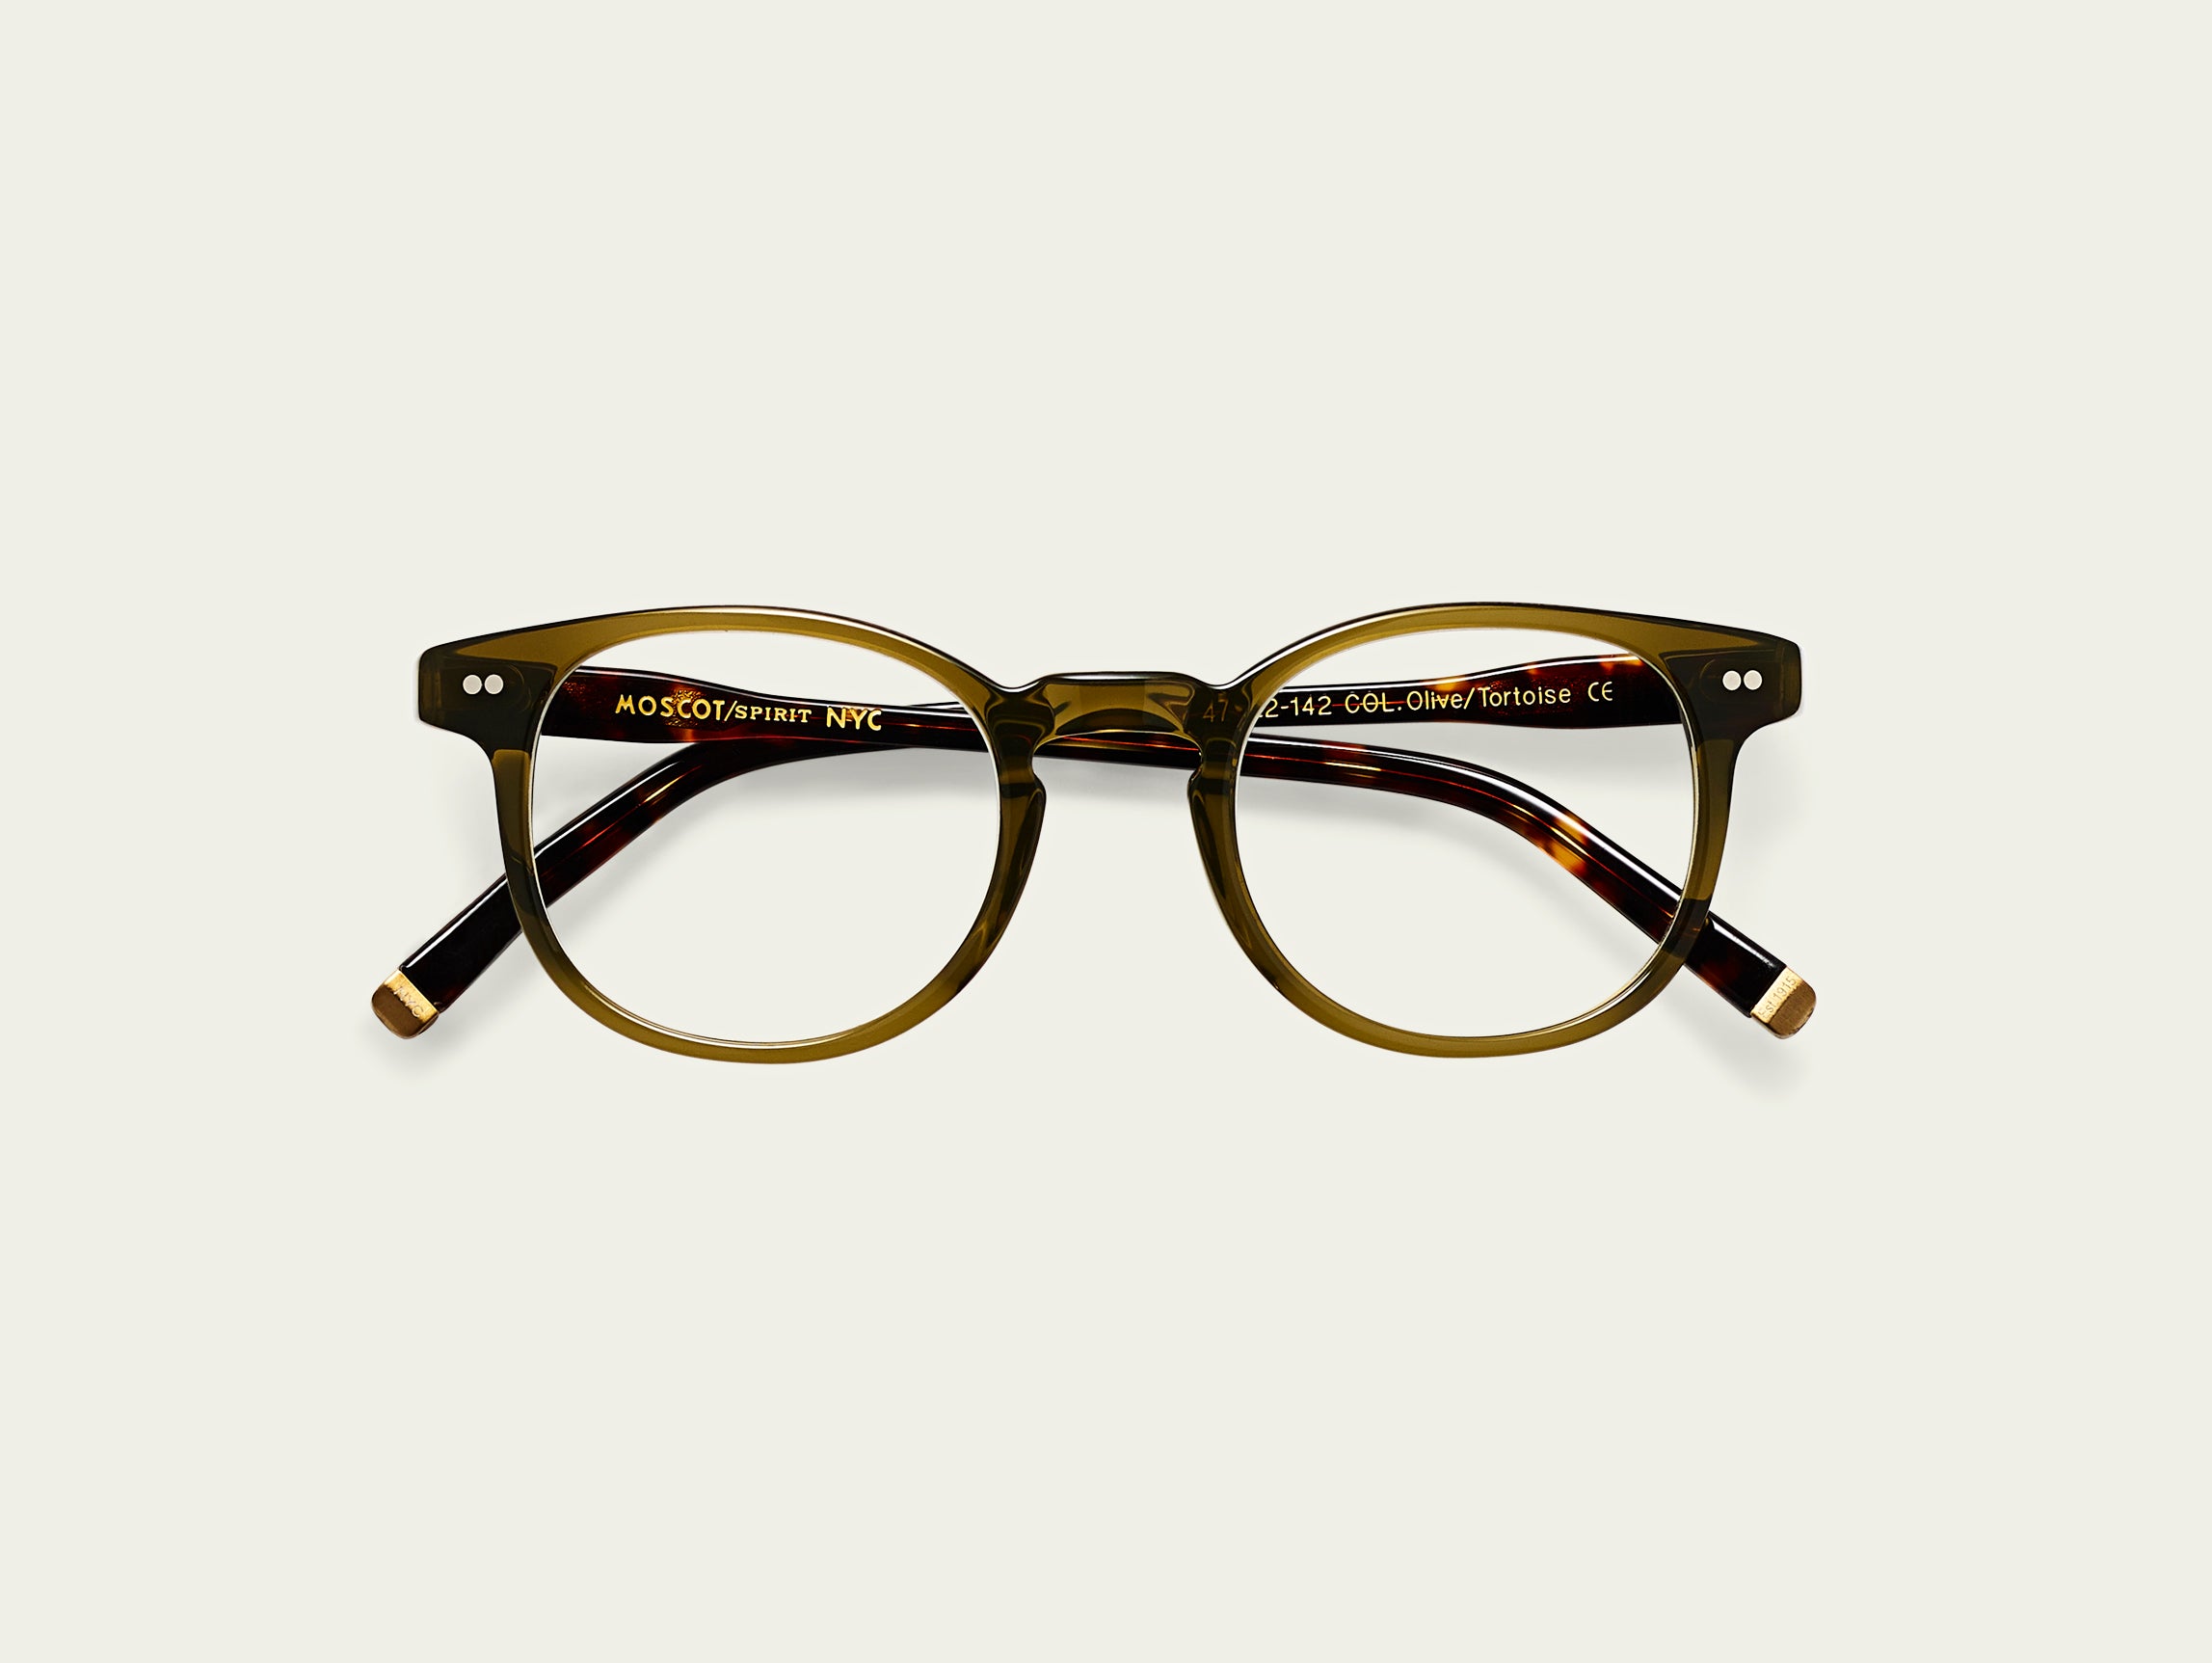 The MORT in olive/tortoise